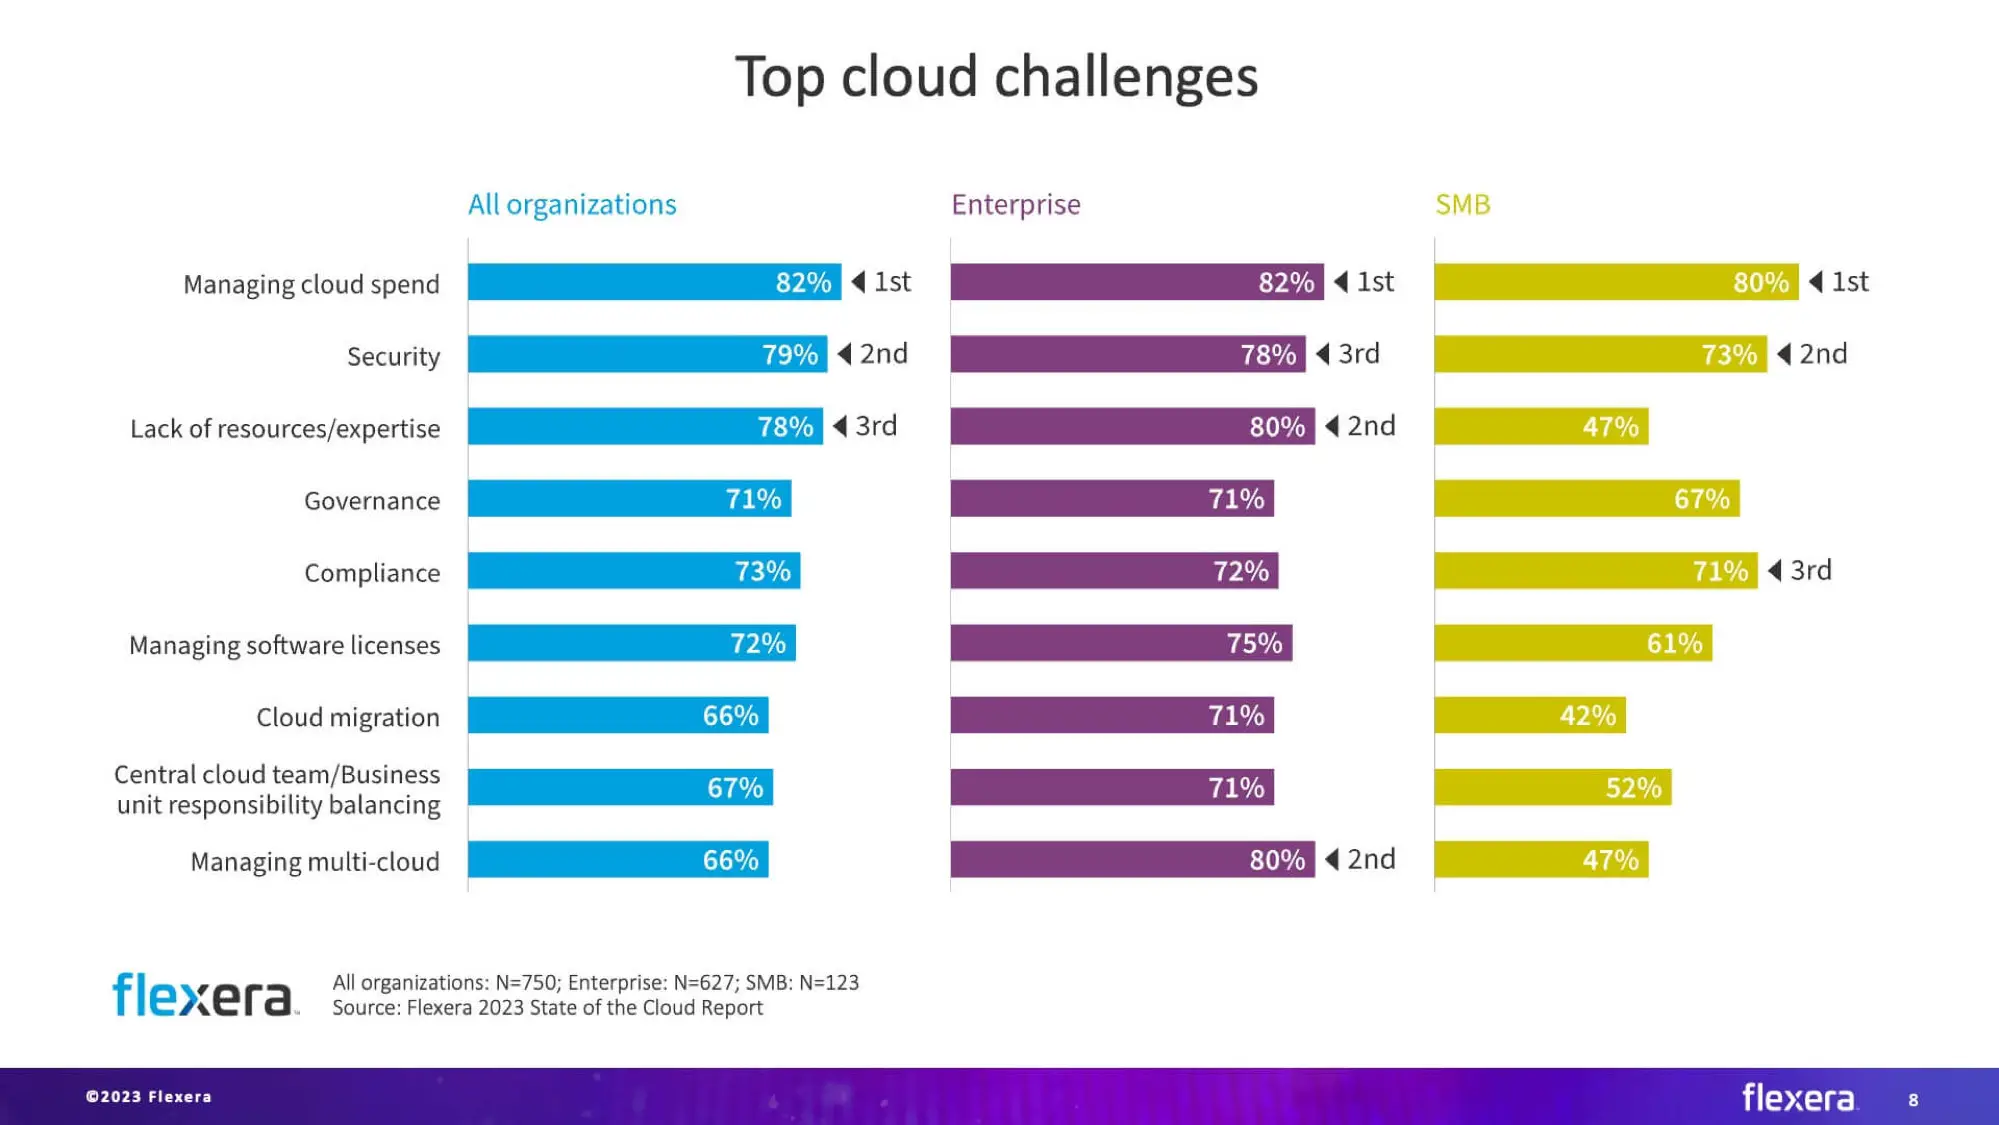 Top Cloud Challenges from Flexera